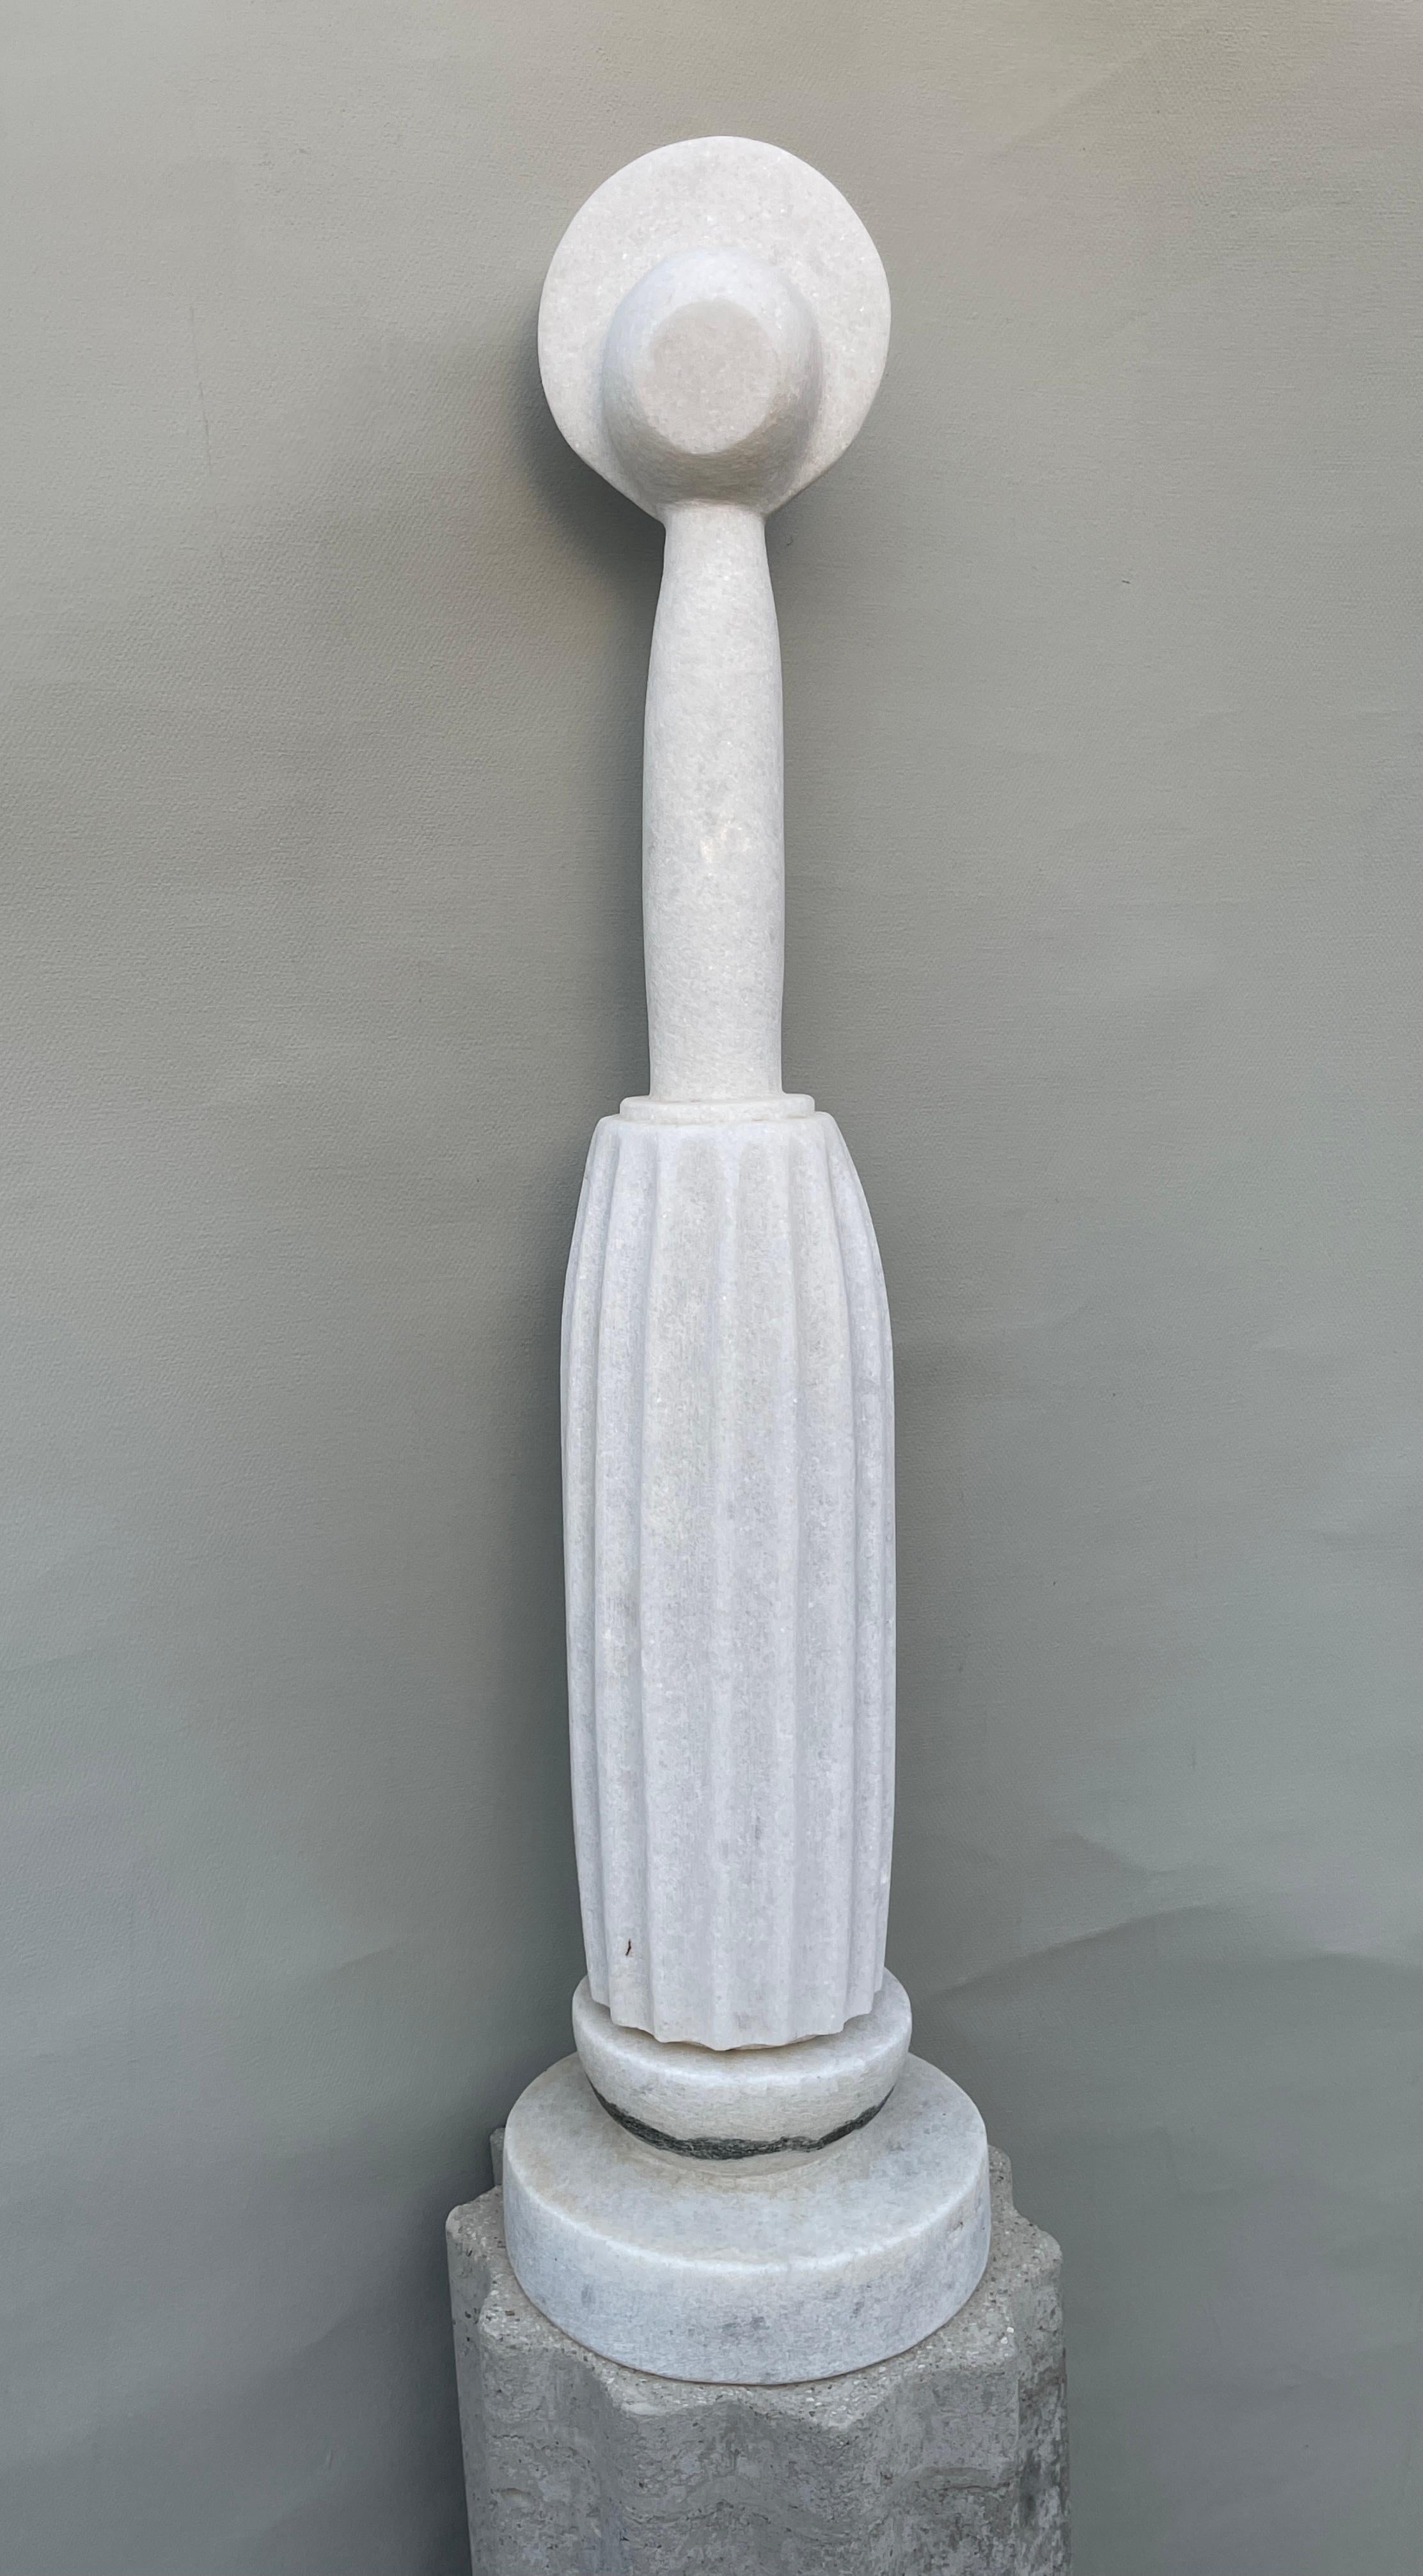 Hera hand carved marble sculpture by Tom Von Kaenel
Dimensions: D 14 x H 85 cm
Materials: marble

Tom von Kaenel, sculptor and painter, was born in Switzerland in 1961. Already in his early childhood he was deeply devoted to art. His desire to